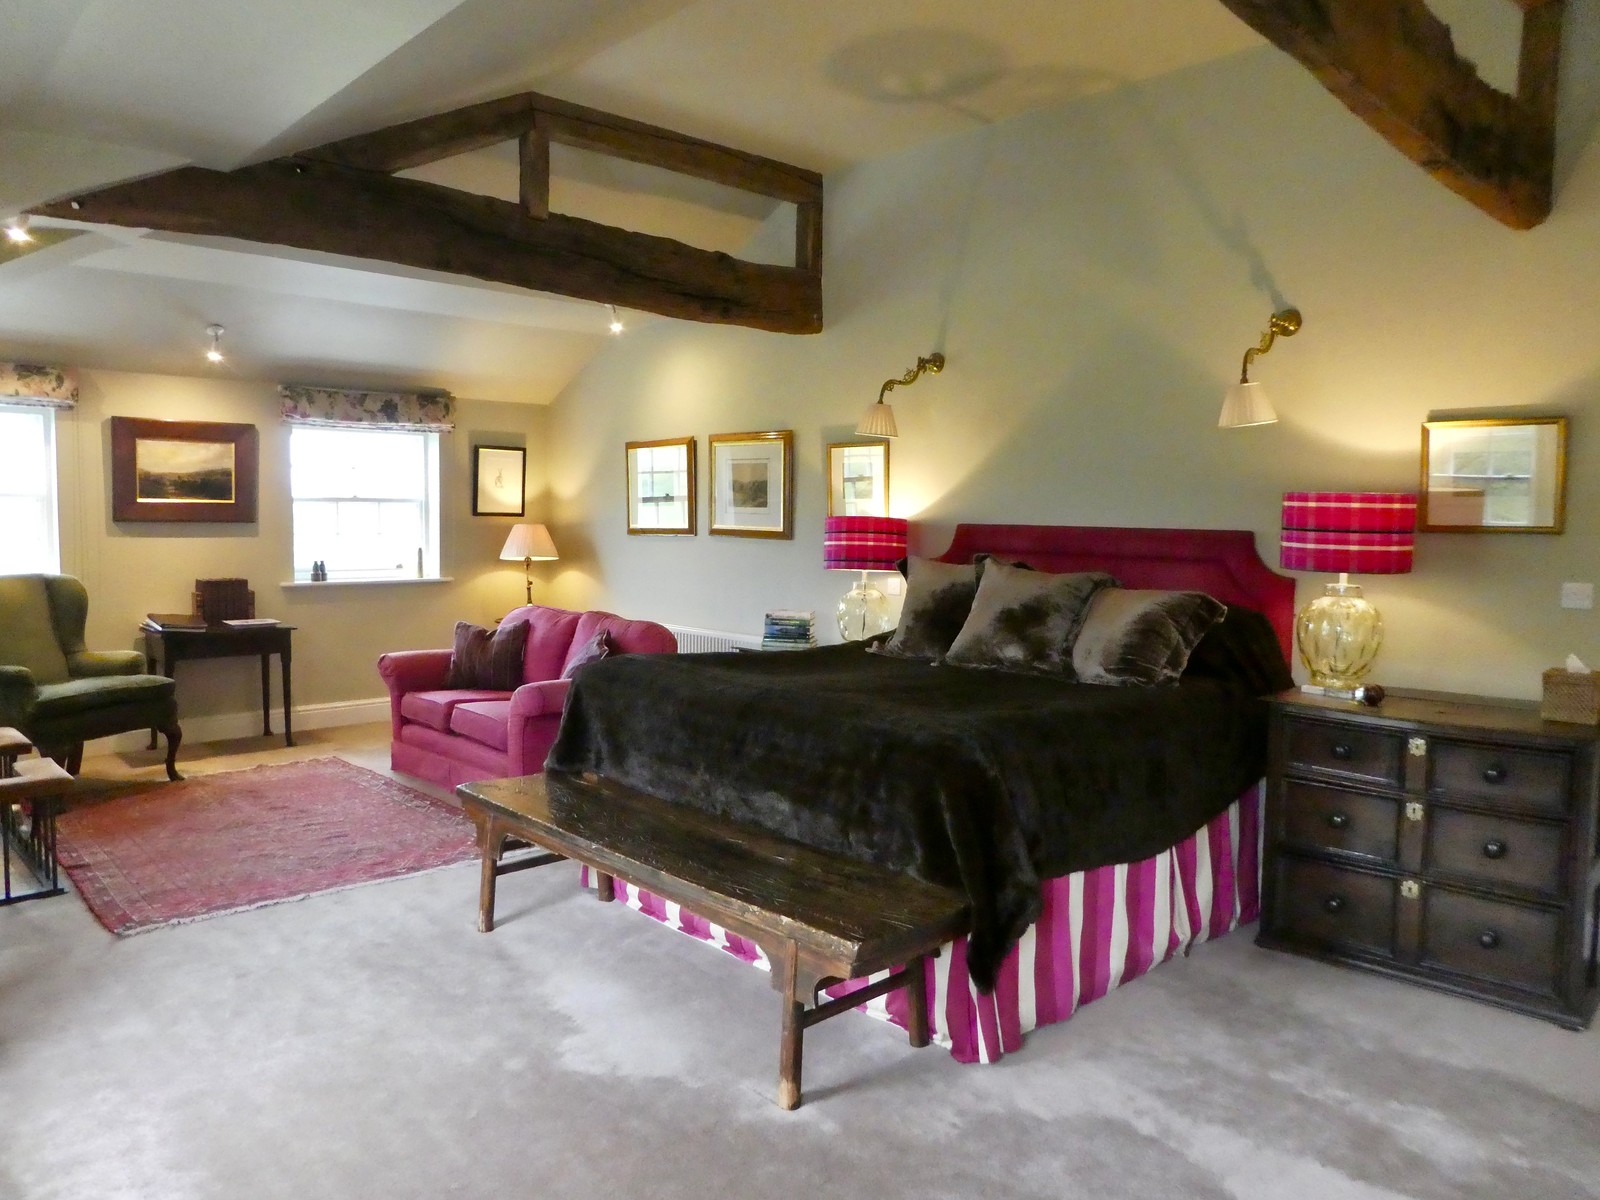 Bedroom, at the Inn at Whitewell, Clitheroe 